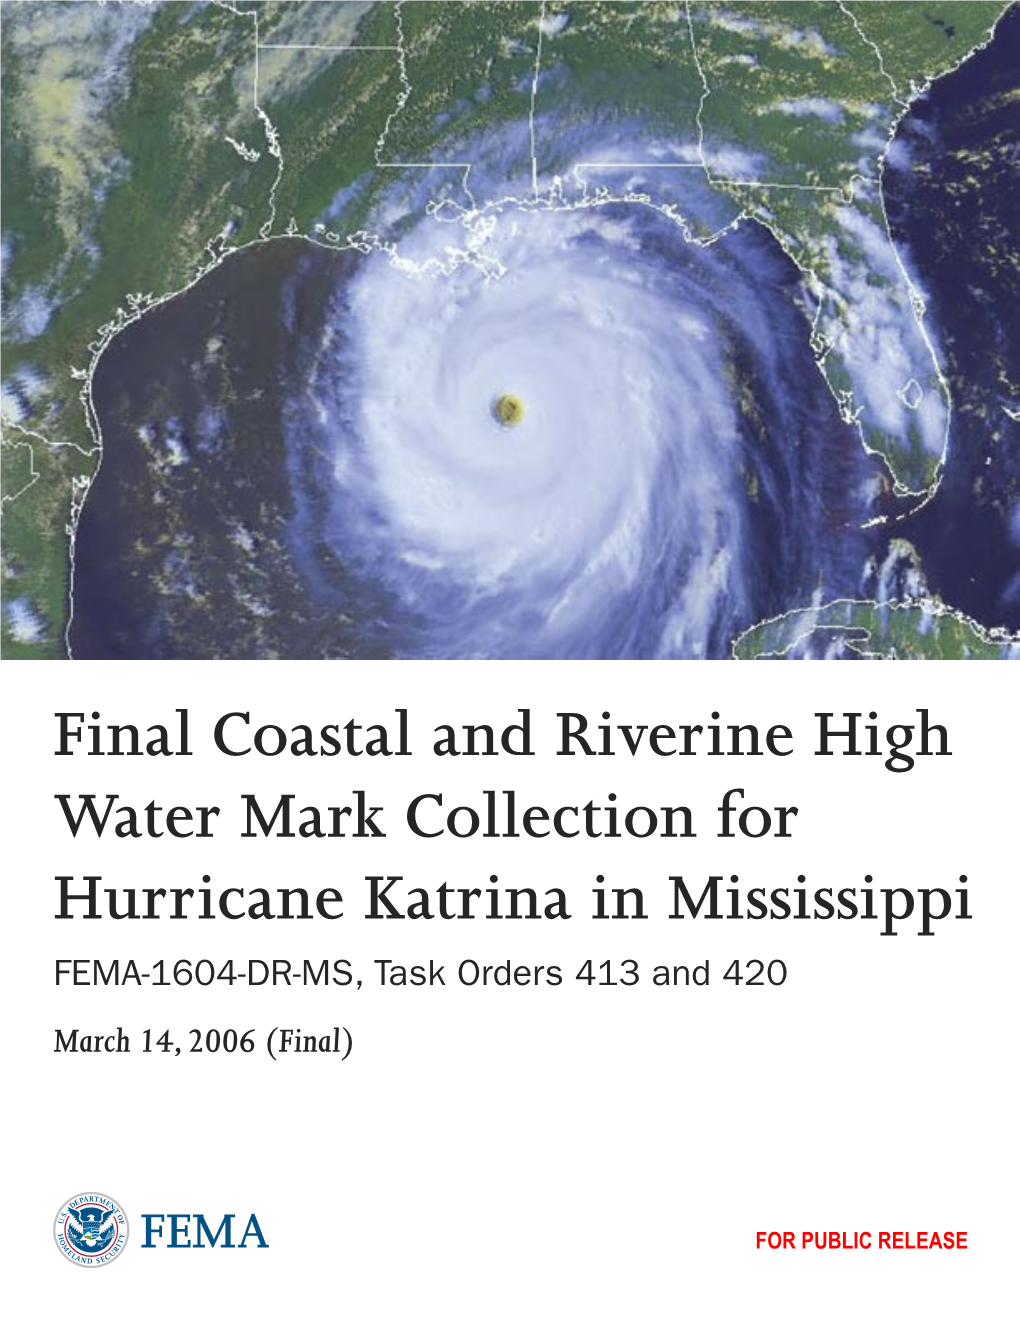 Final Coastal and Riverine High Water Mark Collection for Hurricane Katrina in Mississippi FEMA-1604-DR-MS, Task Orders 413 and 420 March 14, 2006 (Final)